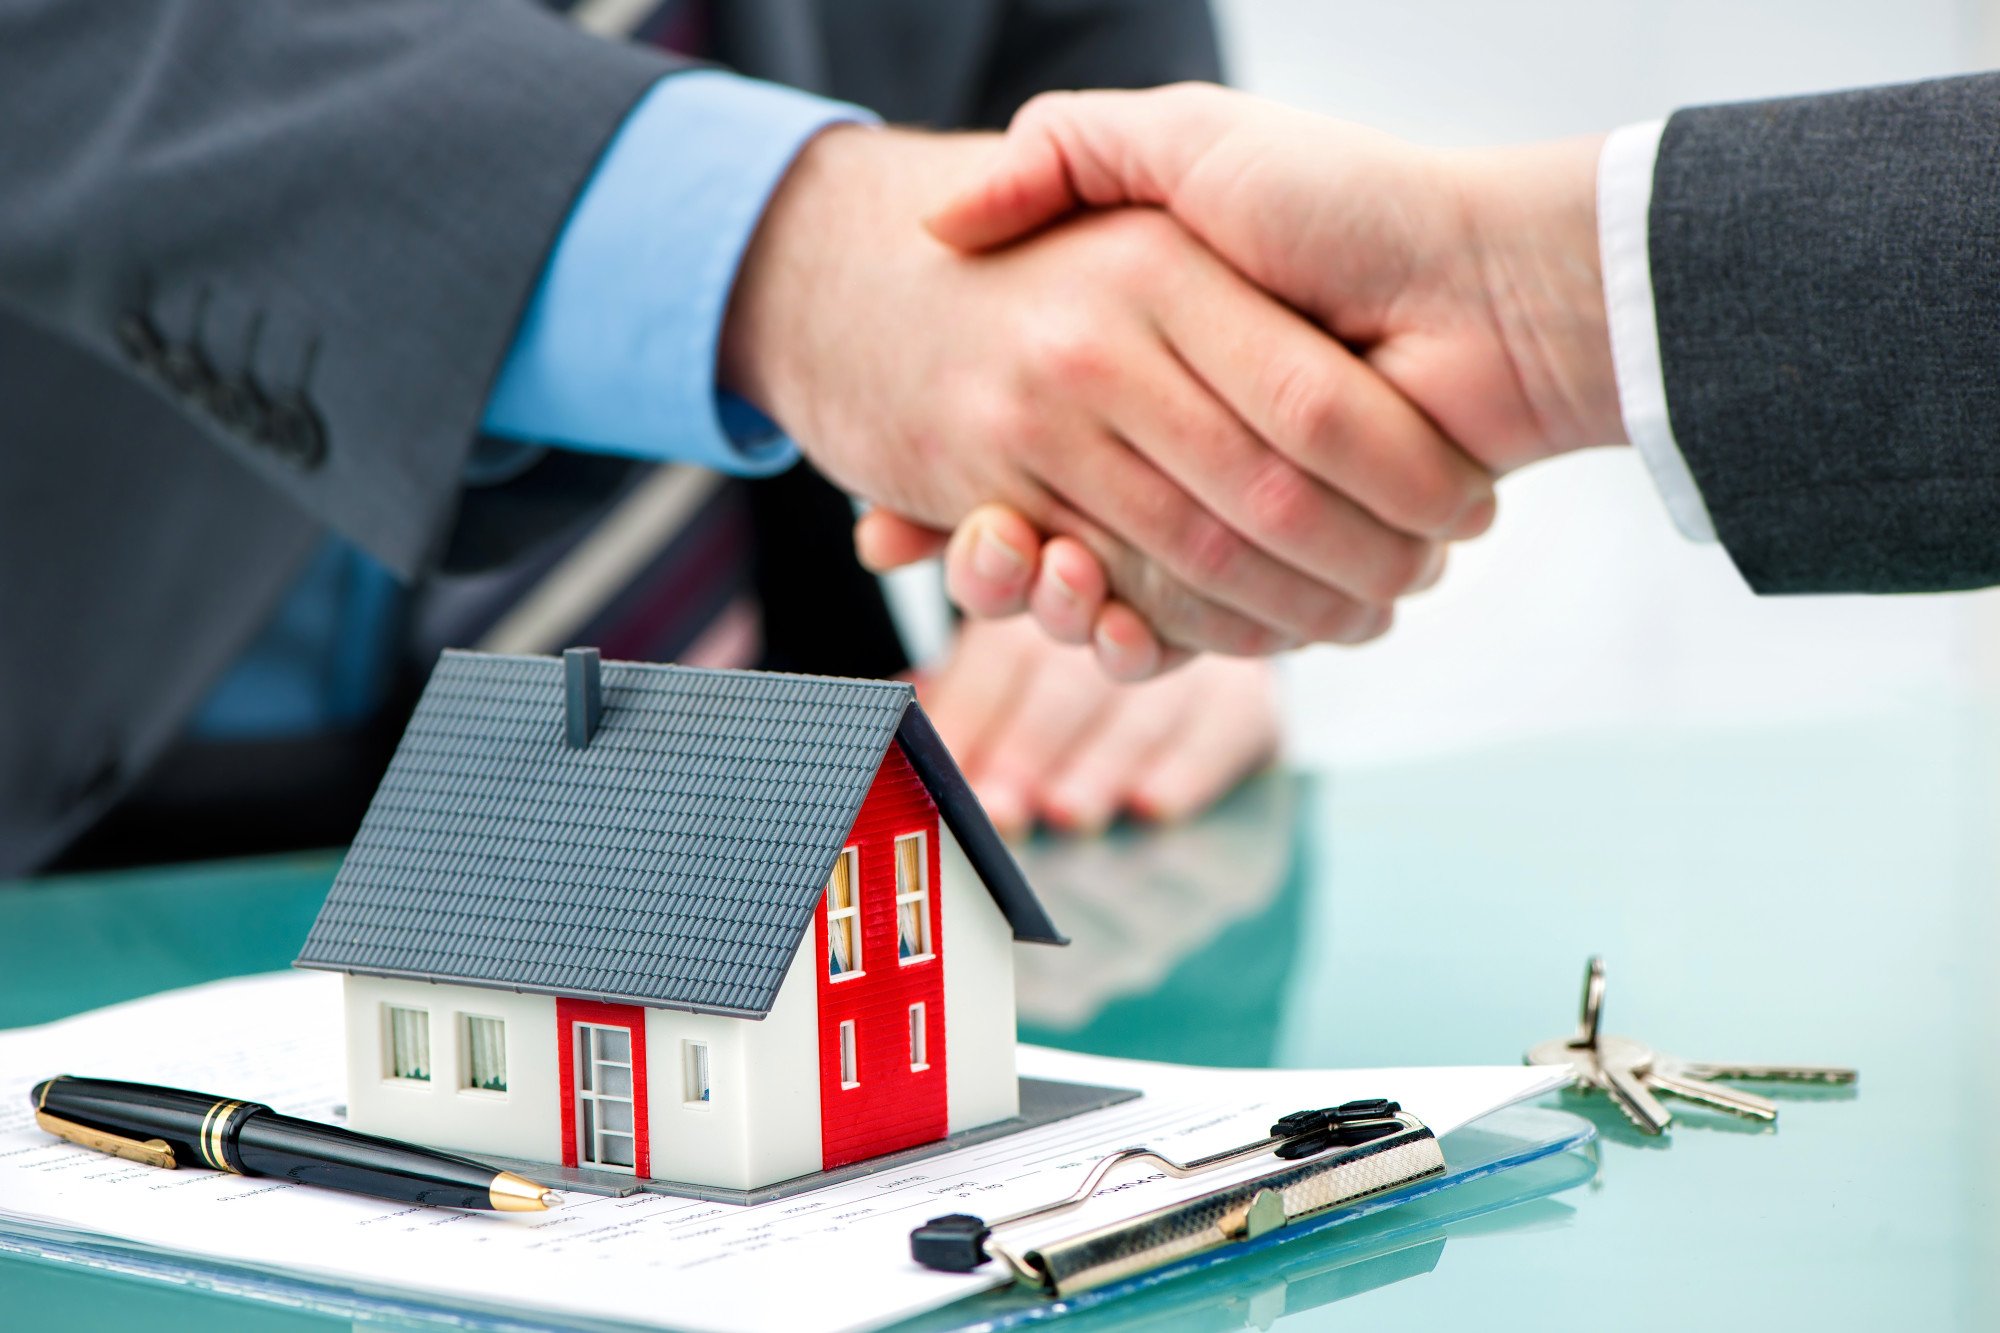 How Do 100 Commission Real Estate Brokerages Work In Florida?